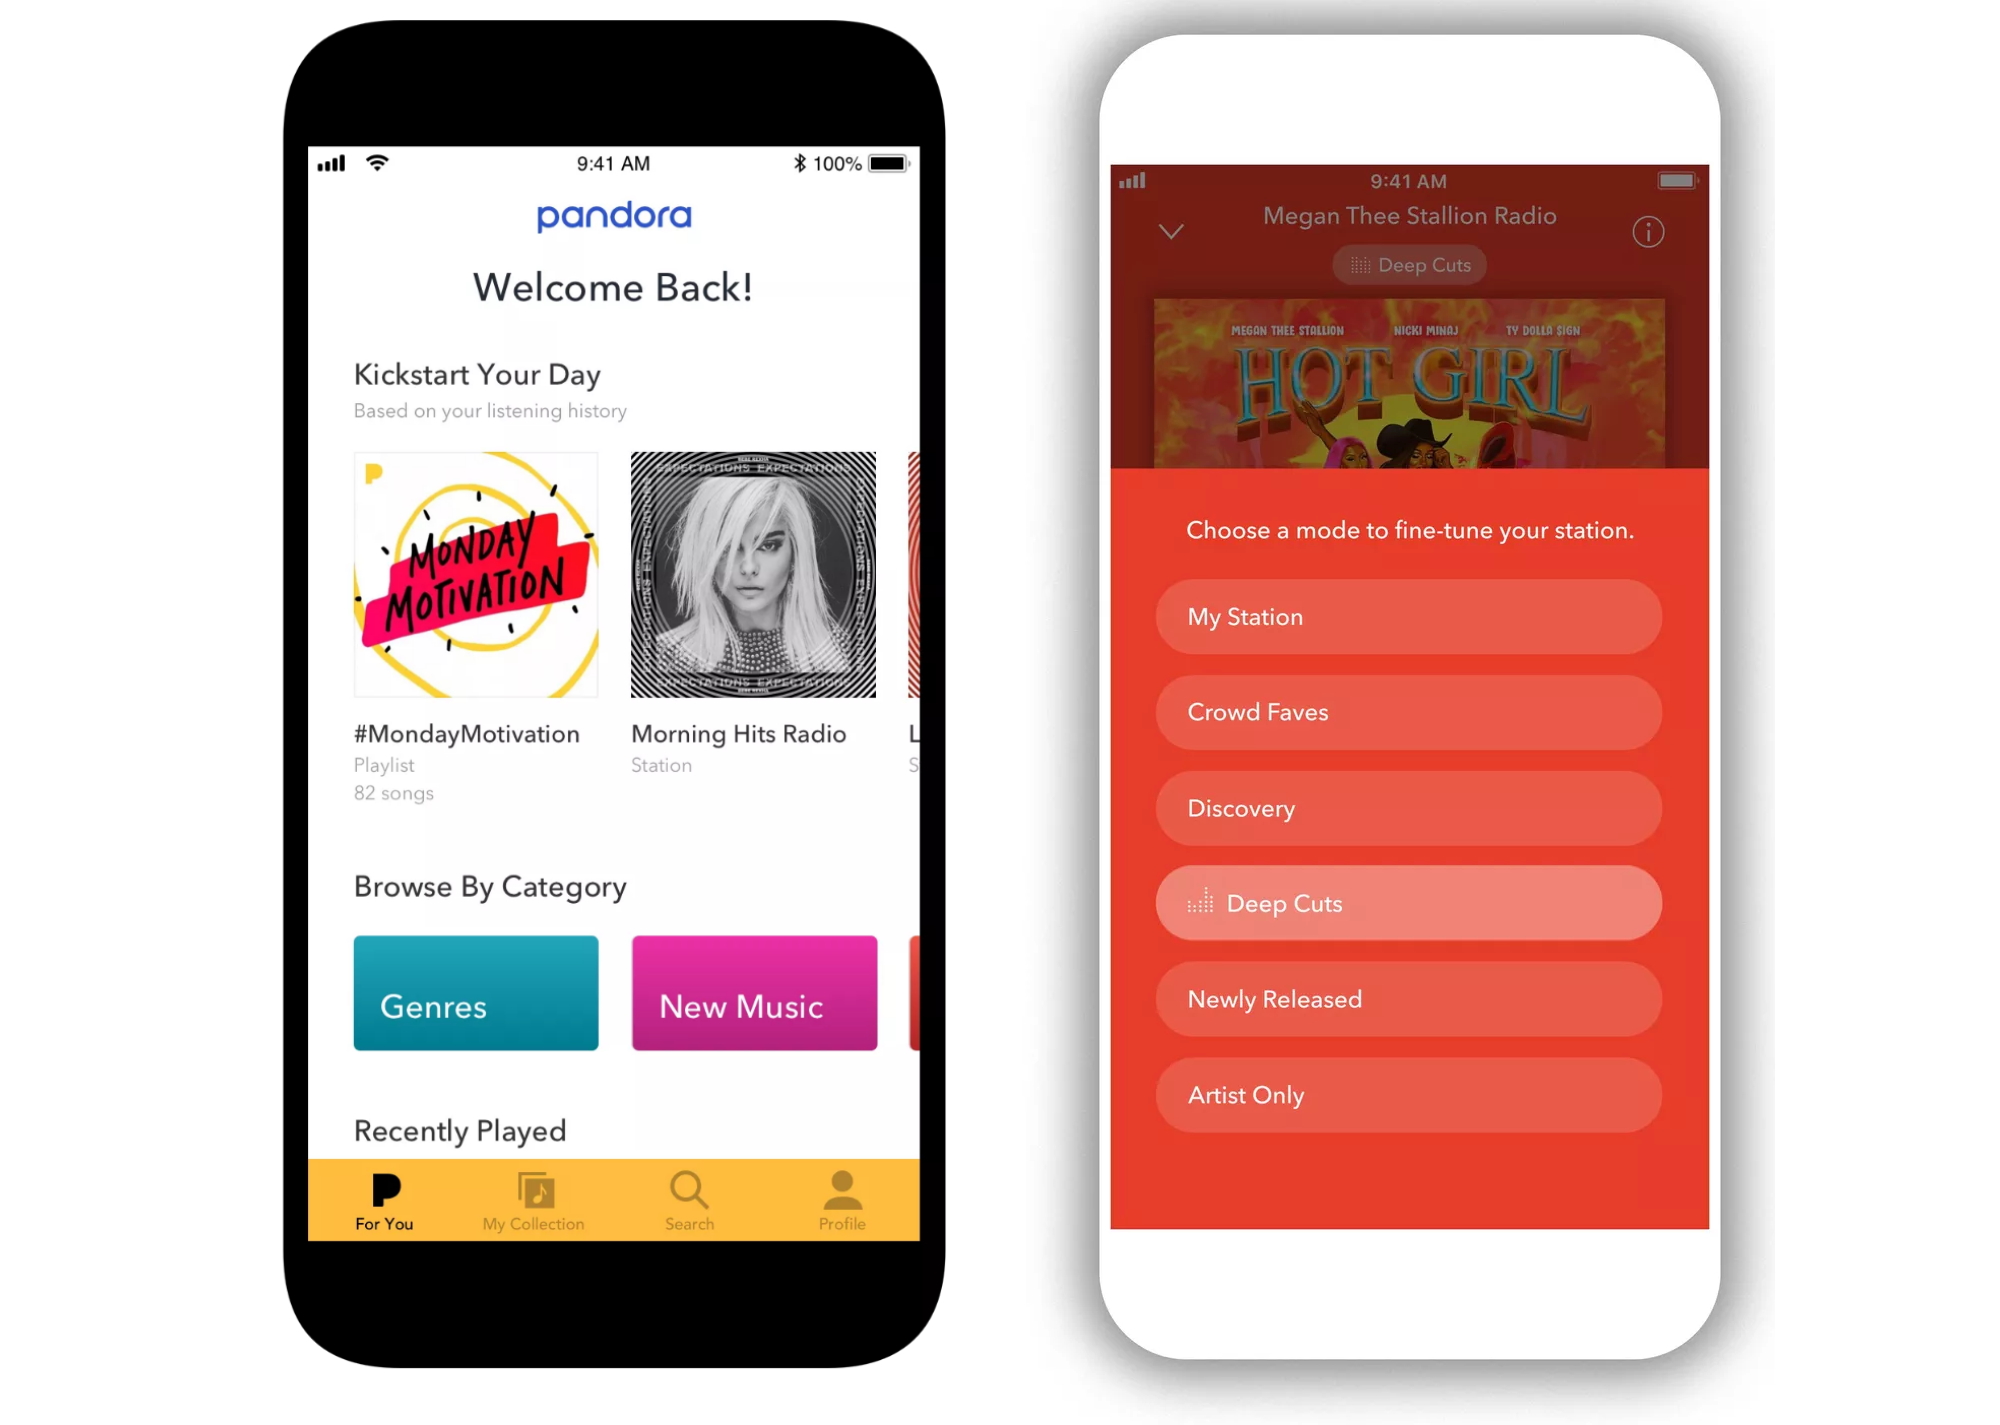 Pandora’s brand new app is here and more personal than ever